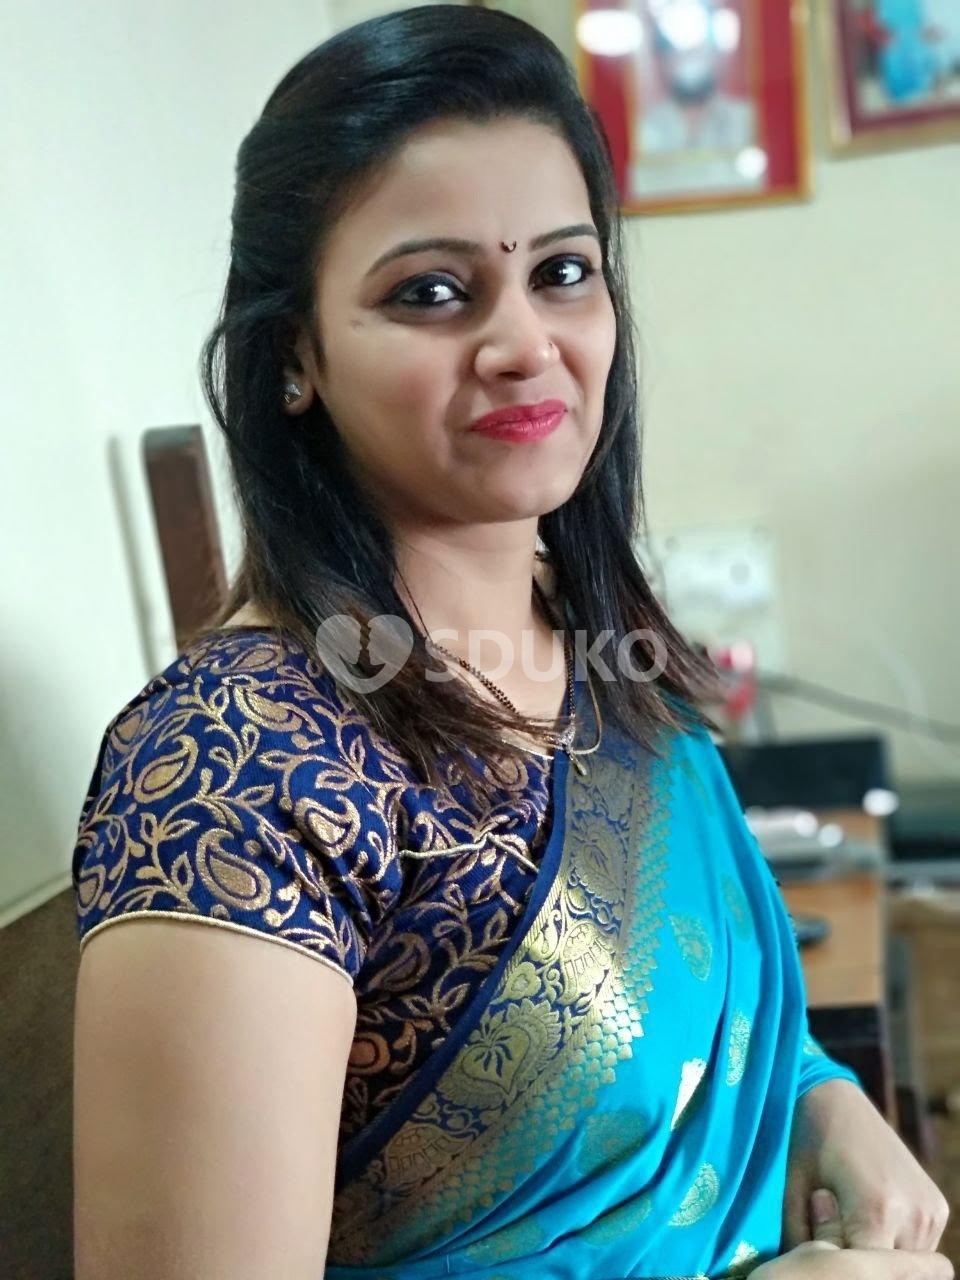 Kr Puram...💯....low price 🥰100% SAFE AND SECURE TODAY LOW PRICE UNLIMITED ENJOY HOT COLLEGE GIRL HOUSEWIFE AUNTIES